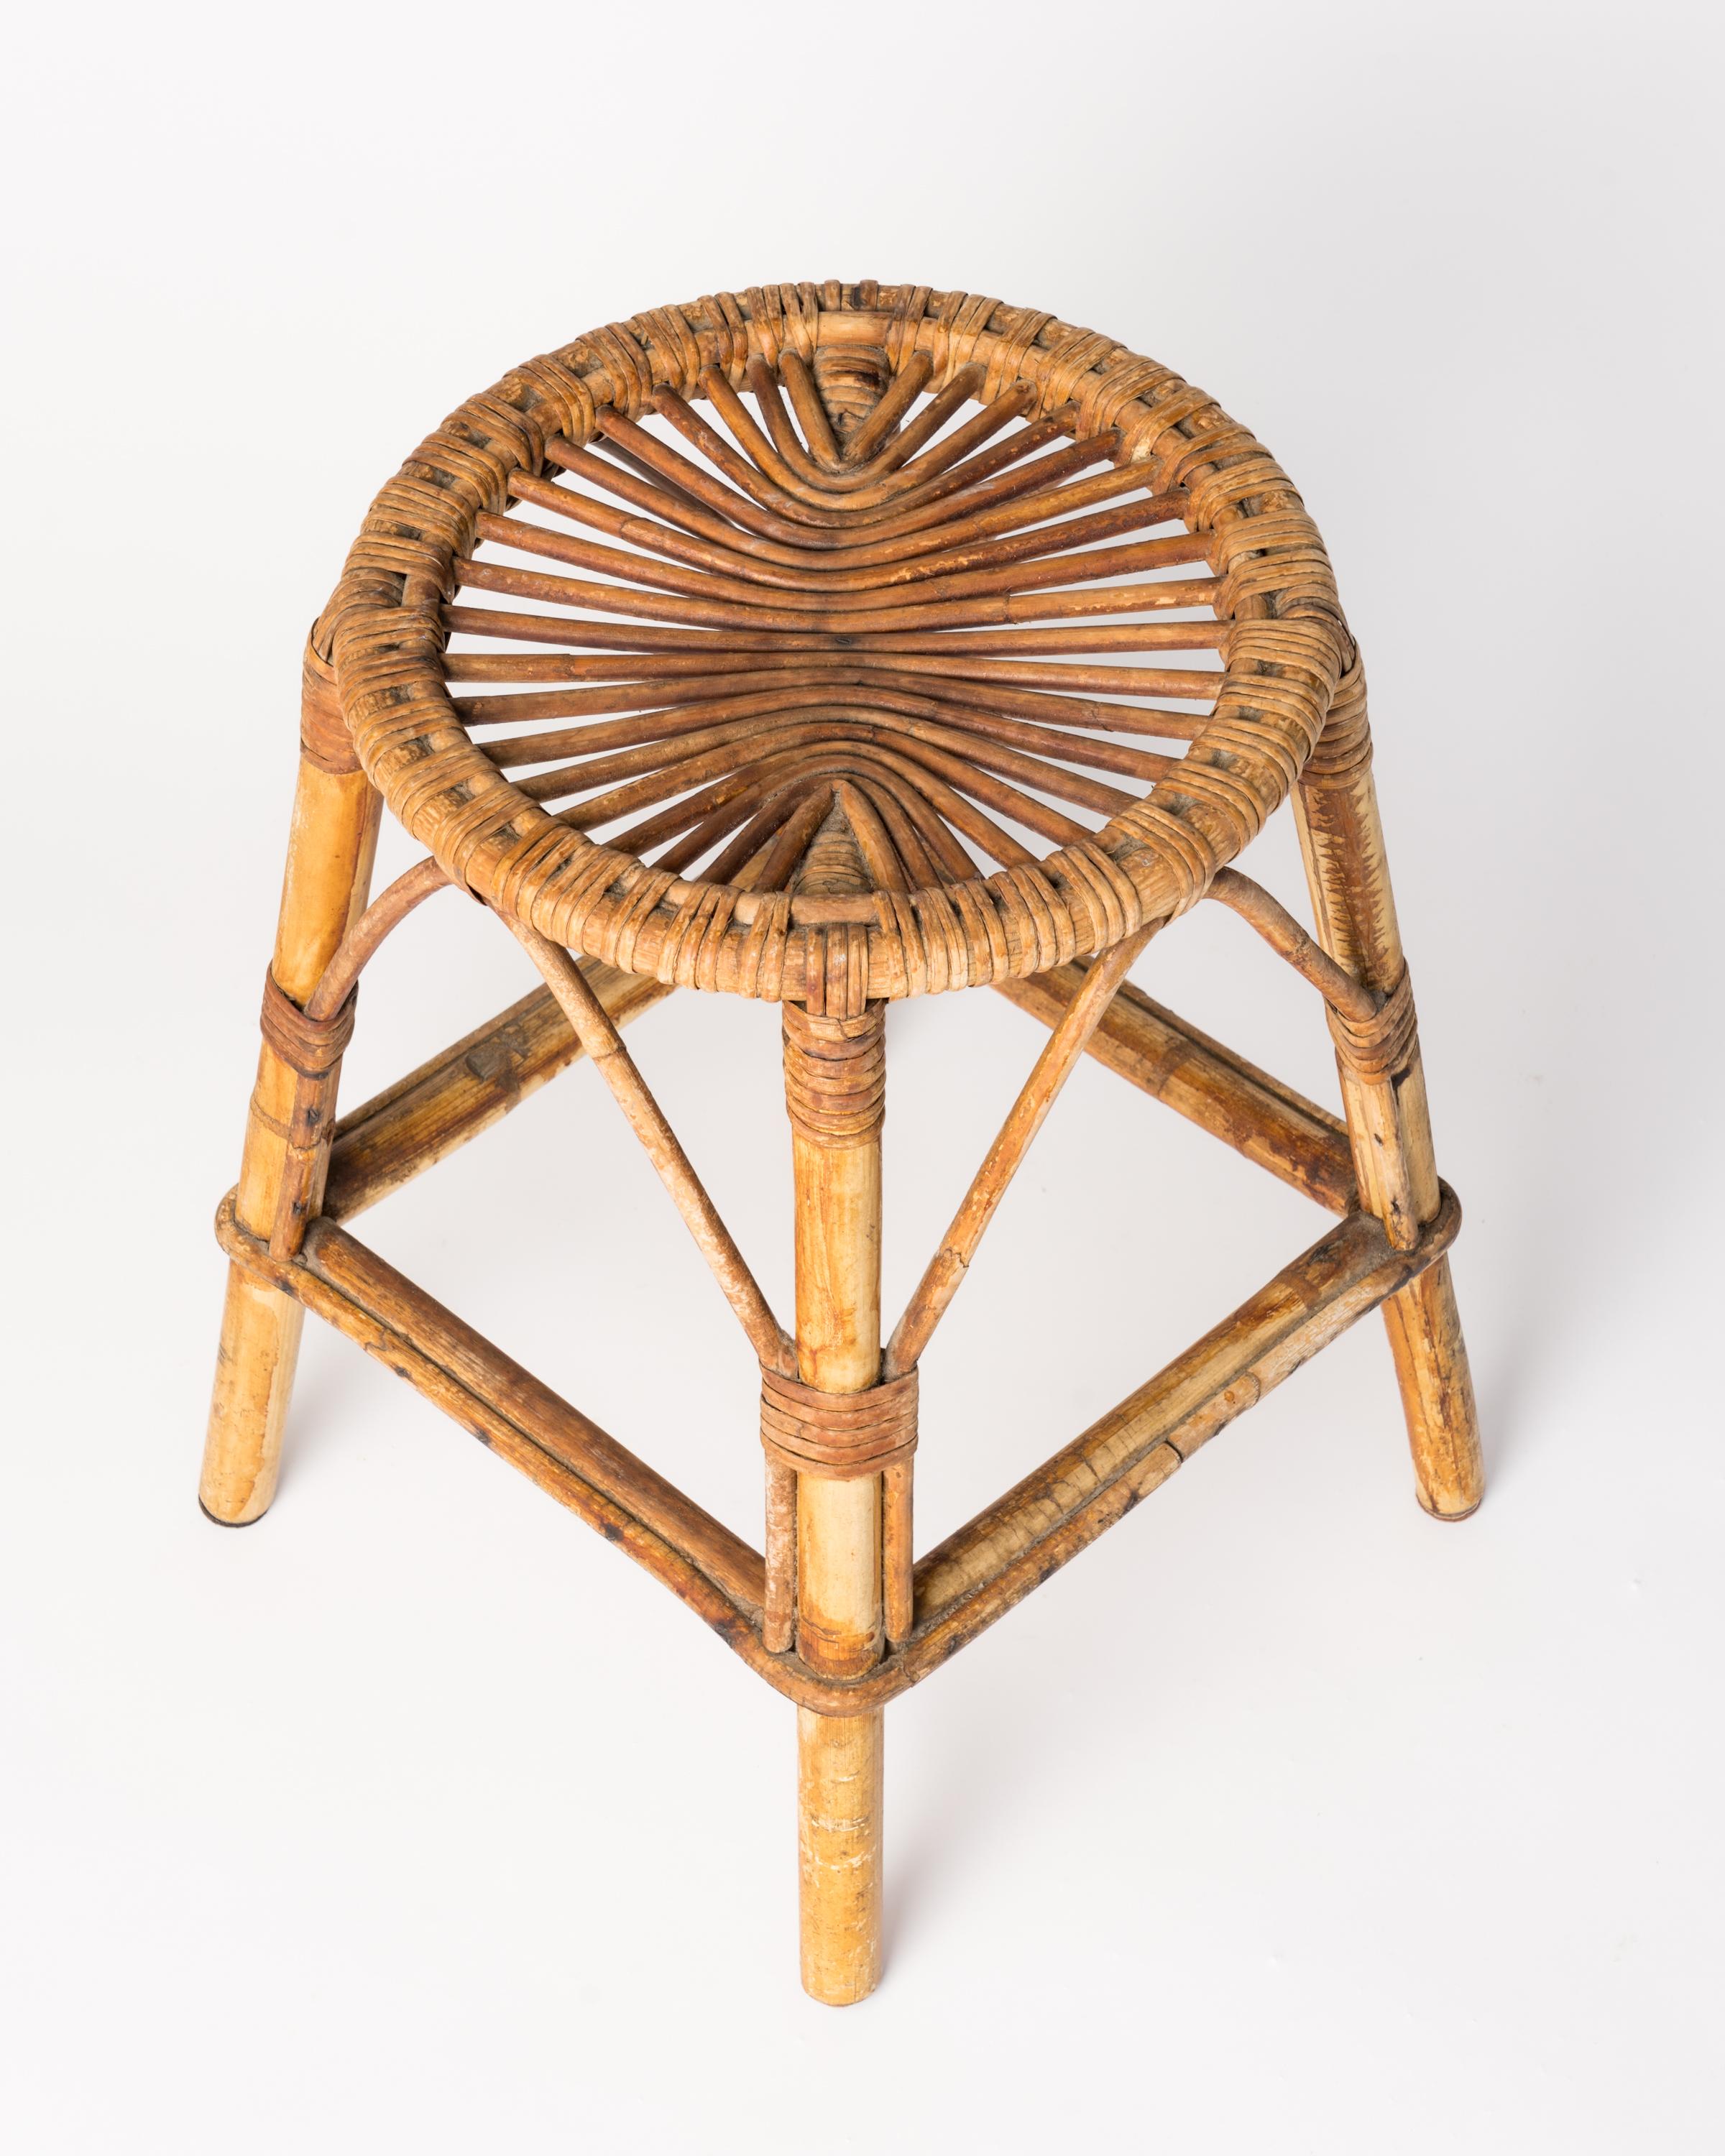 Mid-20th Century Modernist Rattan Stool, France, 1960's For Sale